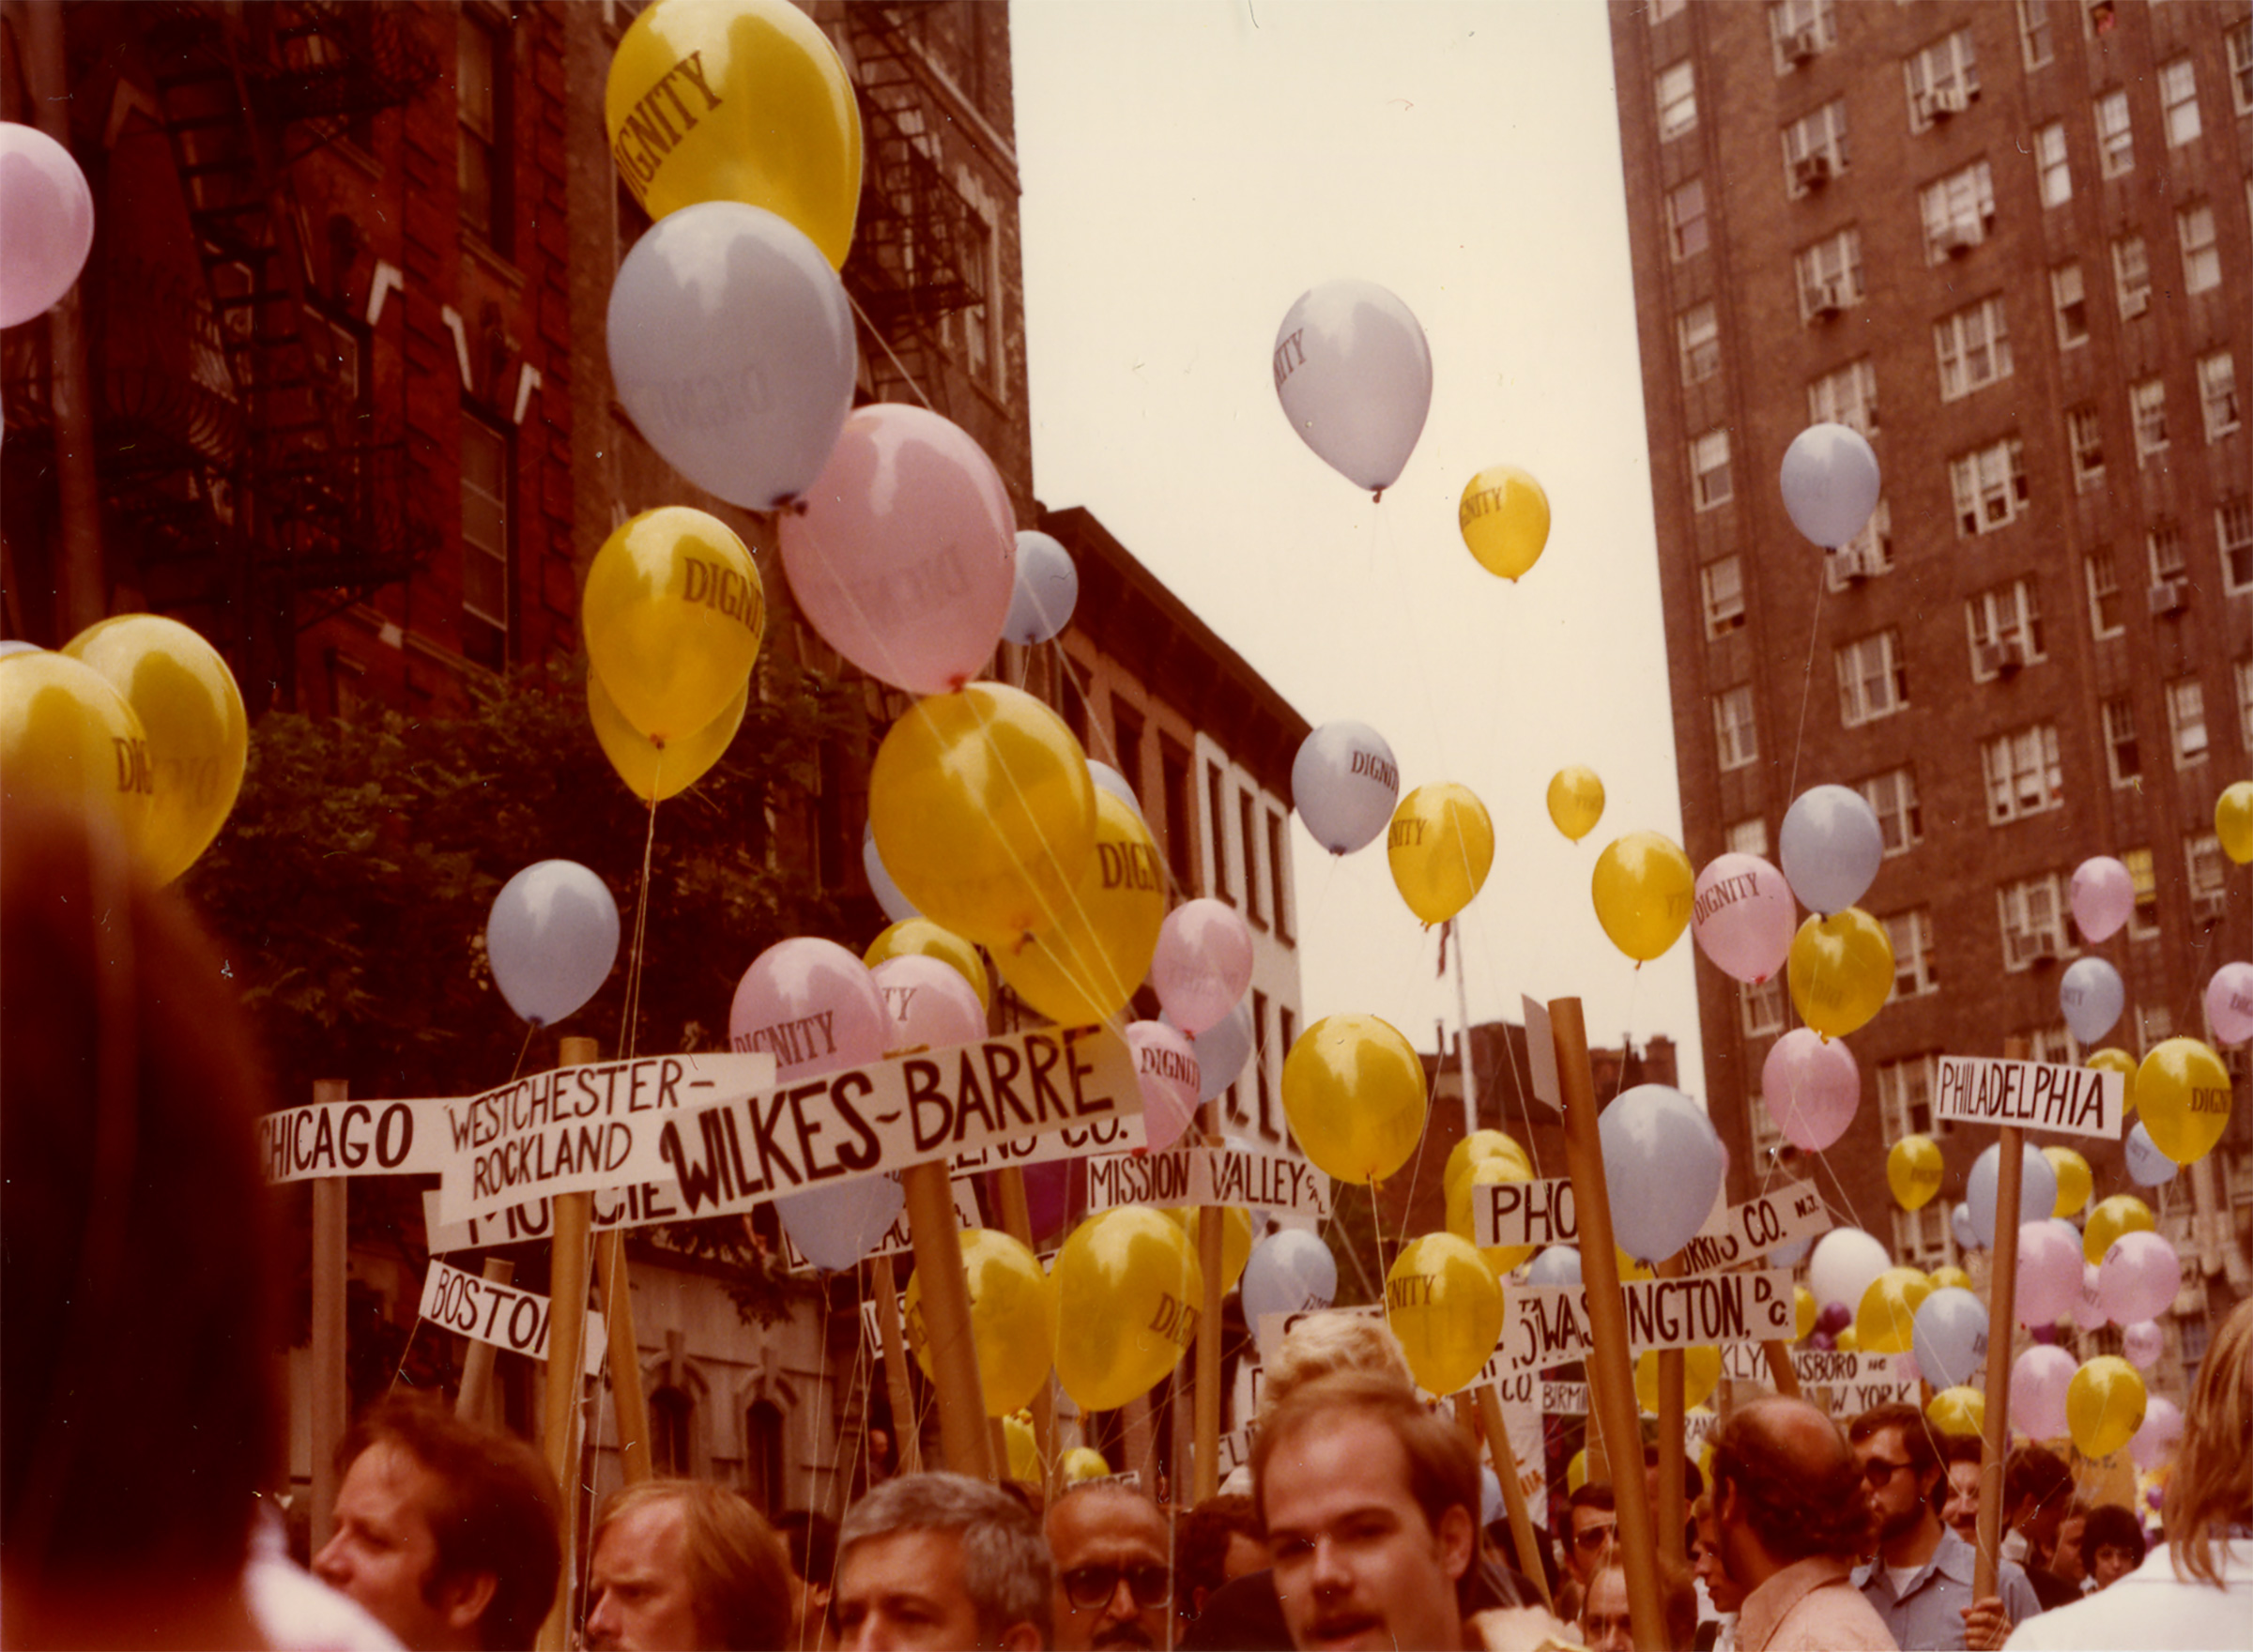 People march with balloons saying DIGNITY and picket signs that indicate place of origin, 1980 (Courtesy of the Estate of George Dudley and the Leslie-Lohman Museum)